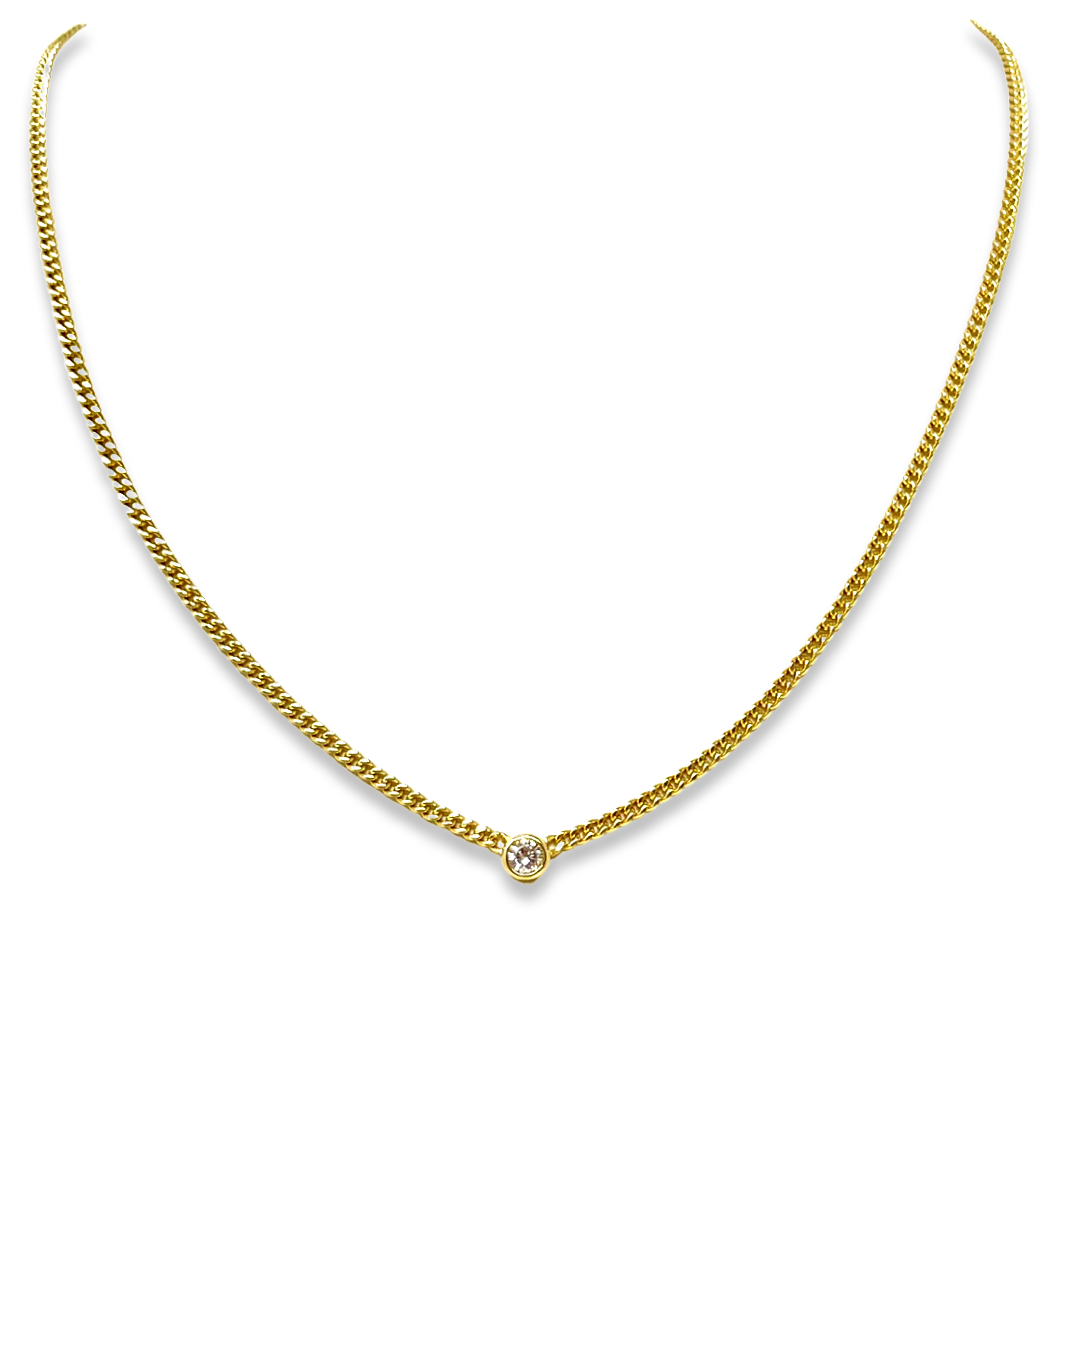 Brenda Cuban Solitaire Necklace in Gold